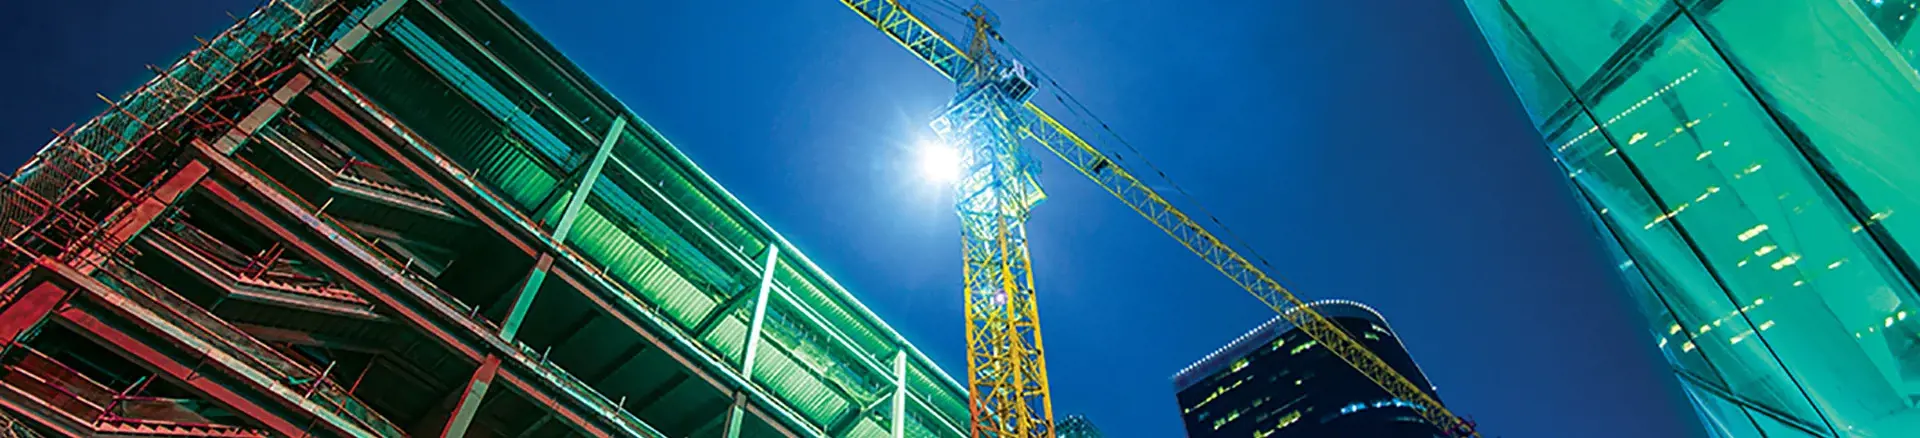 Buildings crane image - Support & Guidance